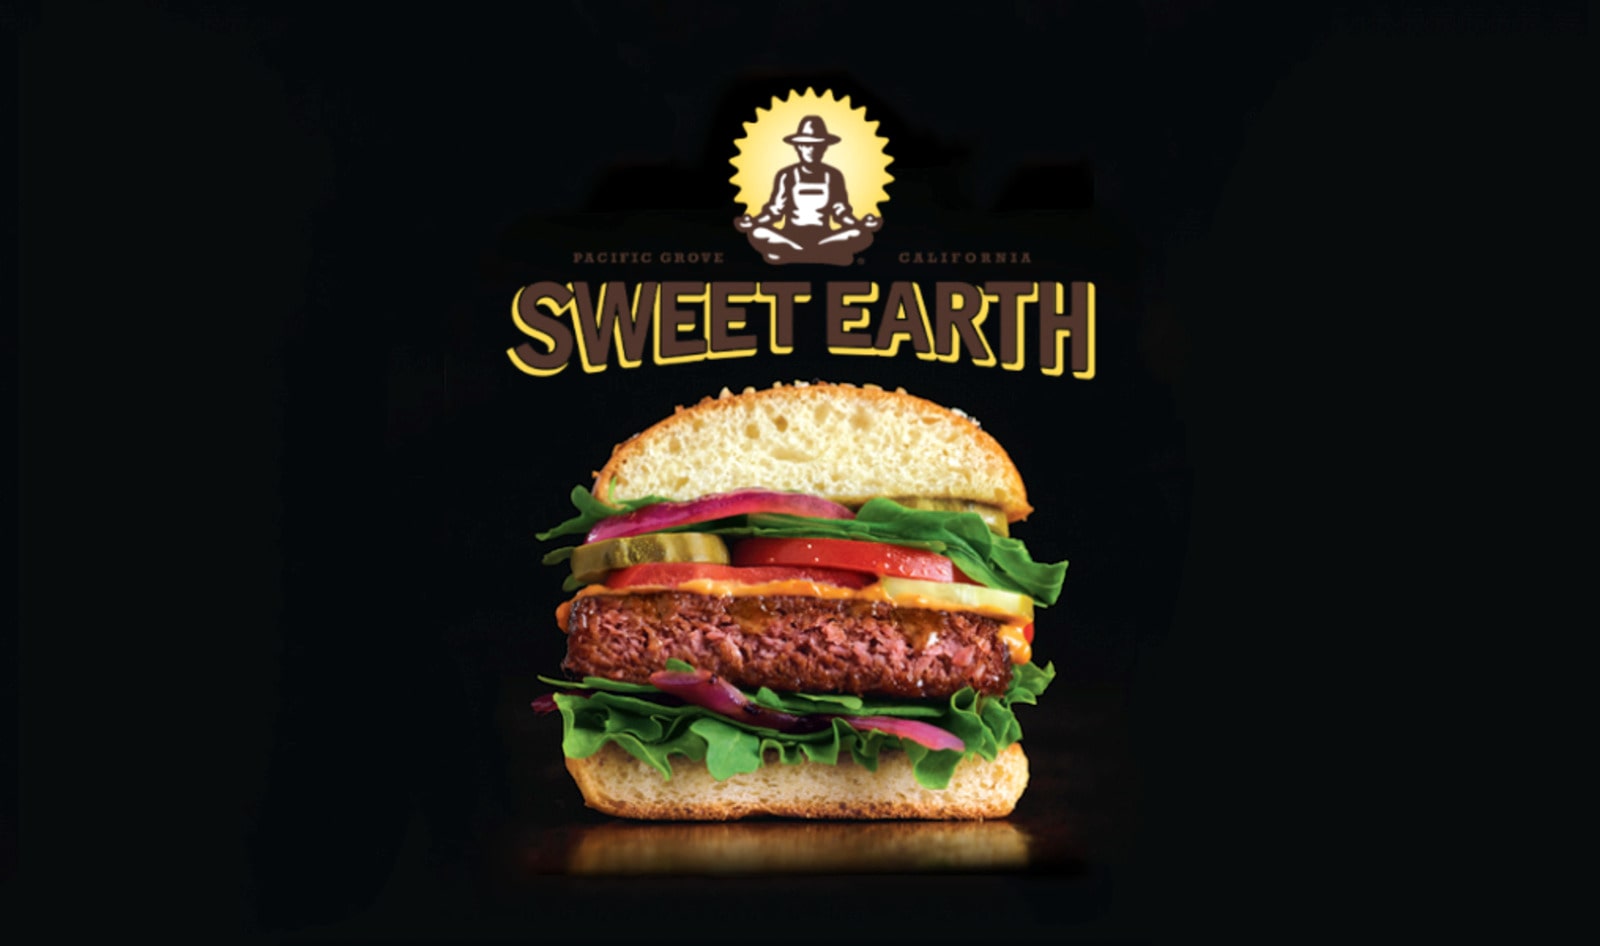 Nestlé to Debut Vegan Awesome Burger in US